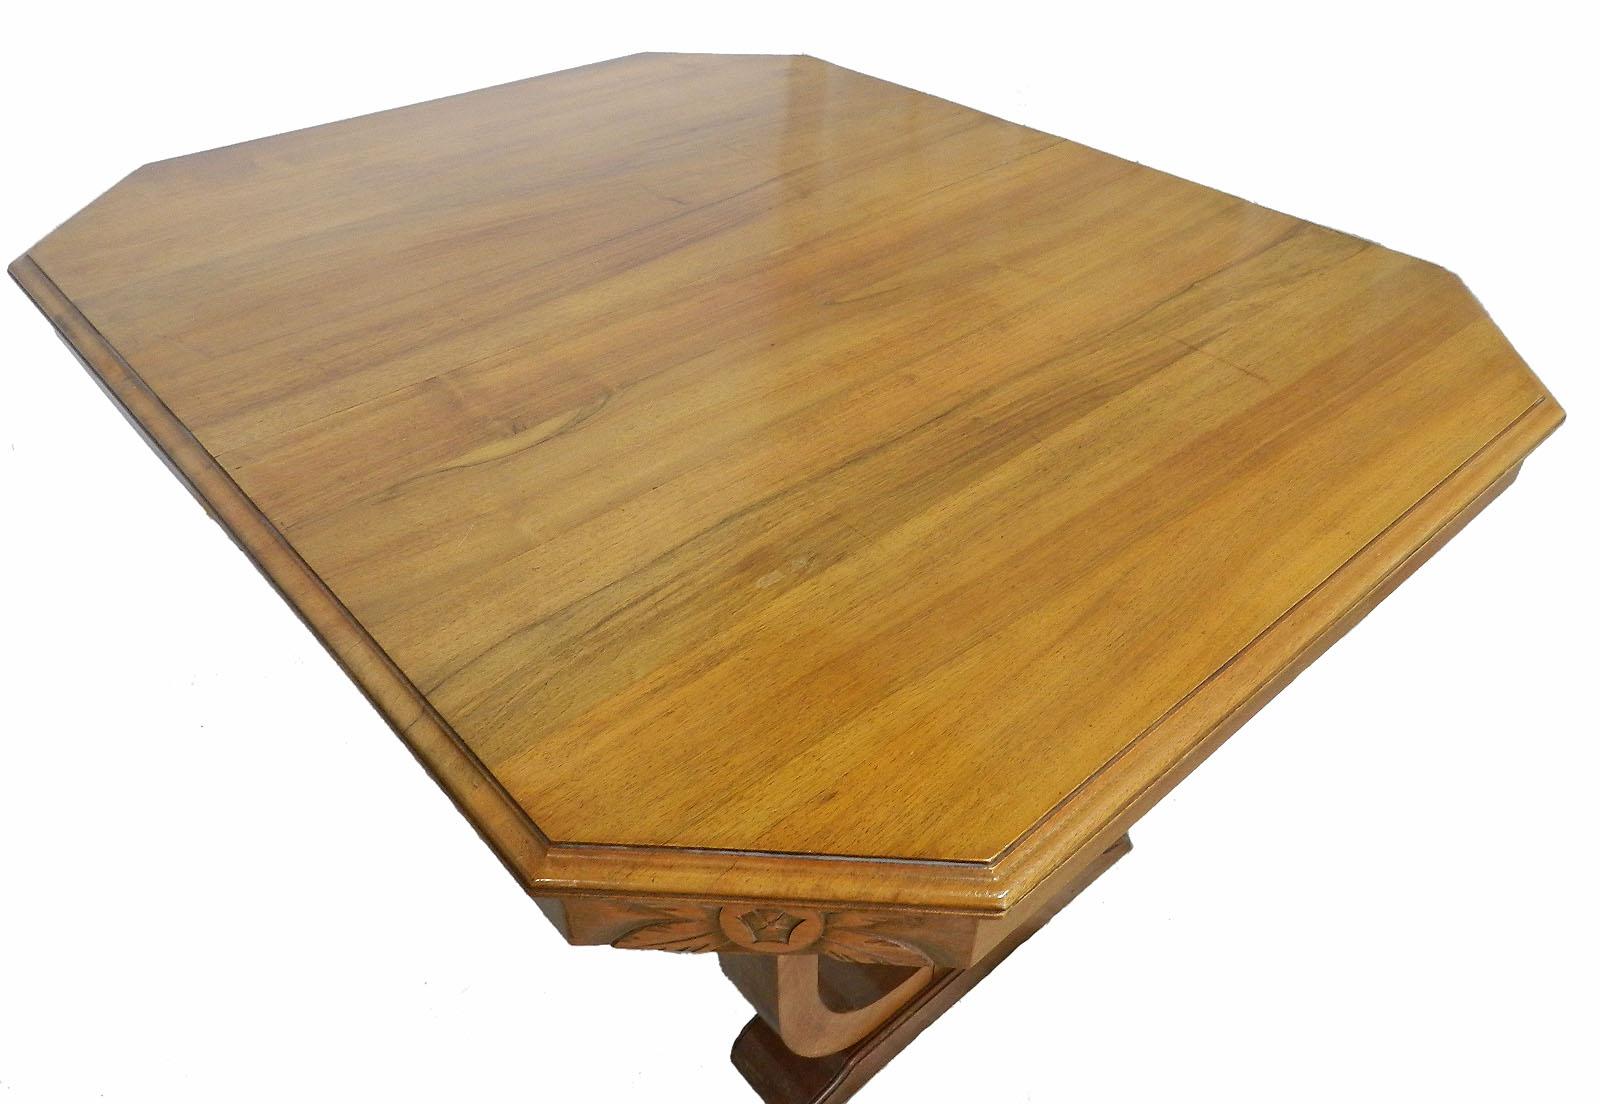 Art Deco dining table French circa 1930 Sue et Mare style
Honey walnut 
This table will extend if required and take extra leaves if needed
Because most extending French dining tables use unfinished non matching wood leaves we recommend having extra